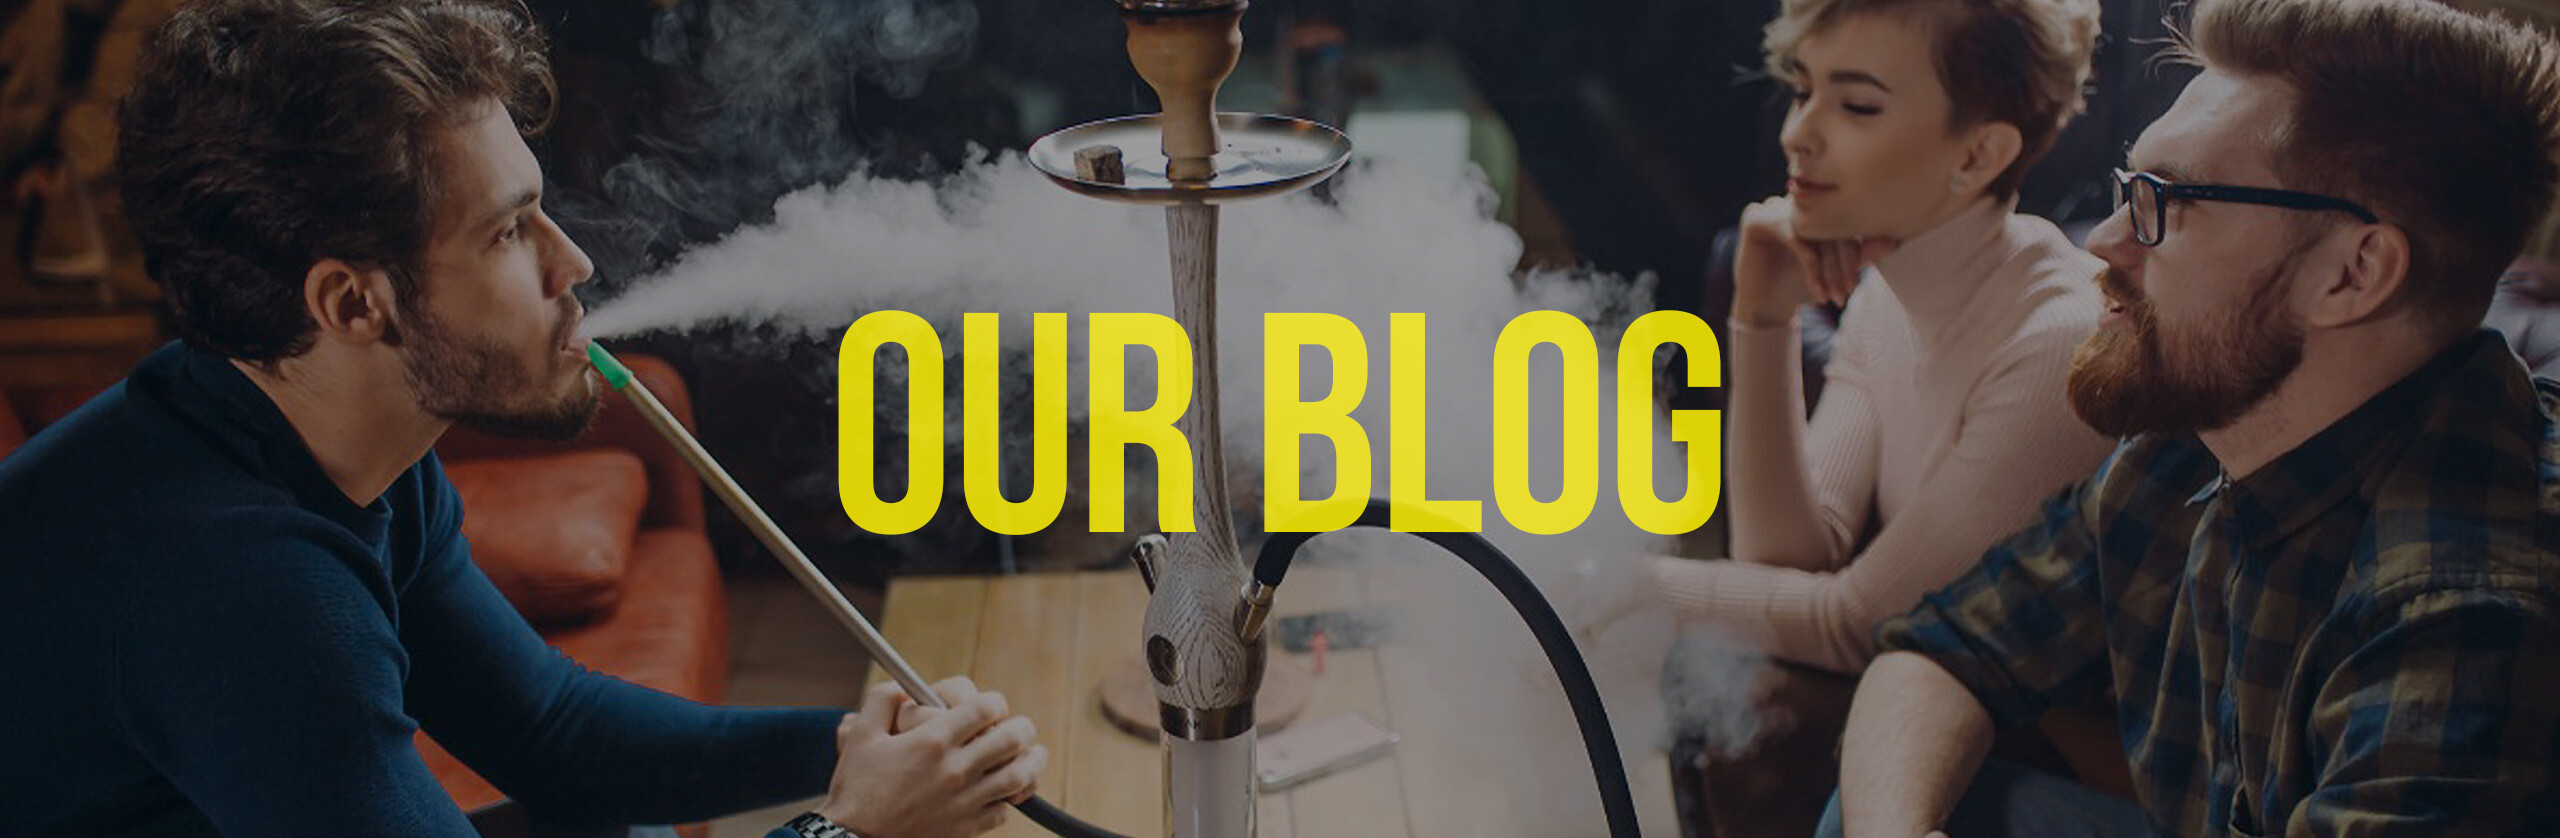 Traditional Hookahs – The Pioneers That Started This Enchanting Journey